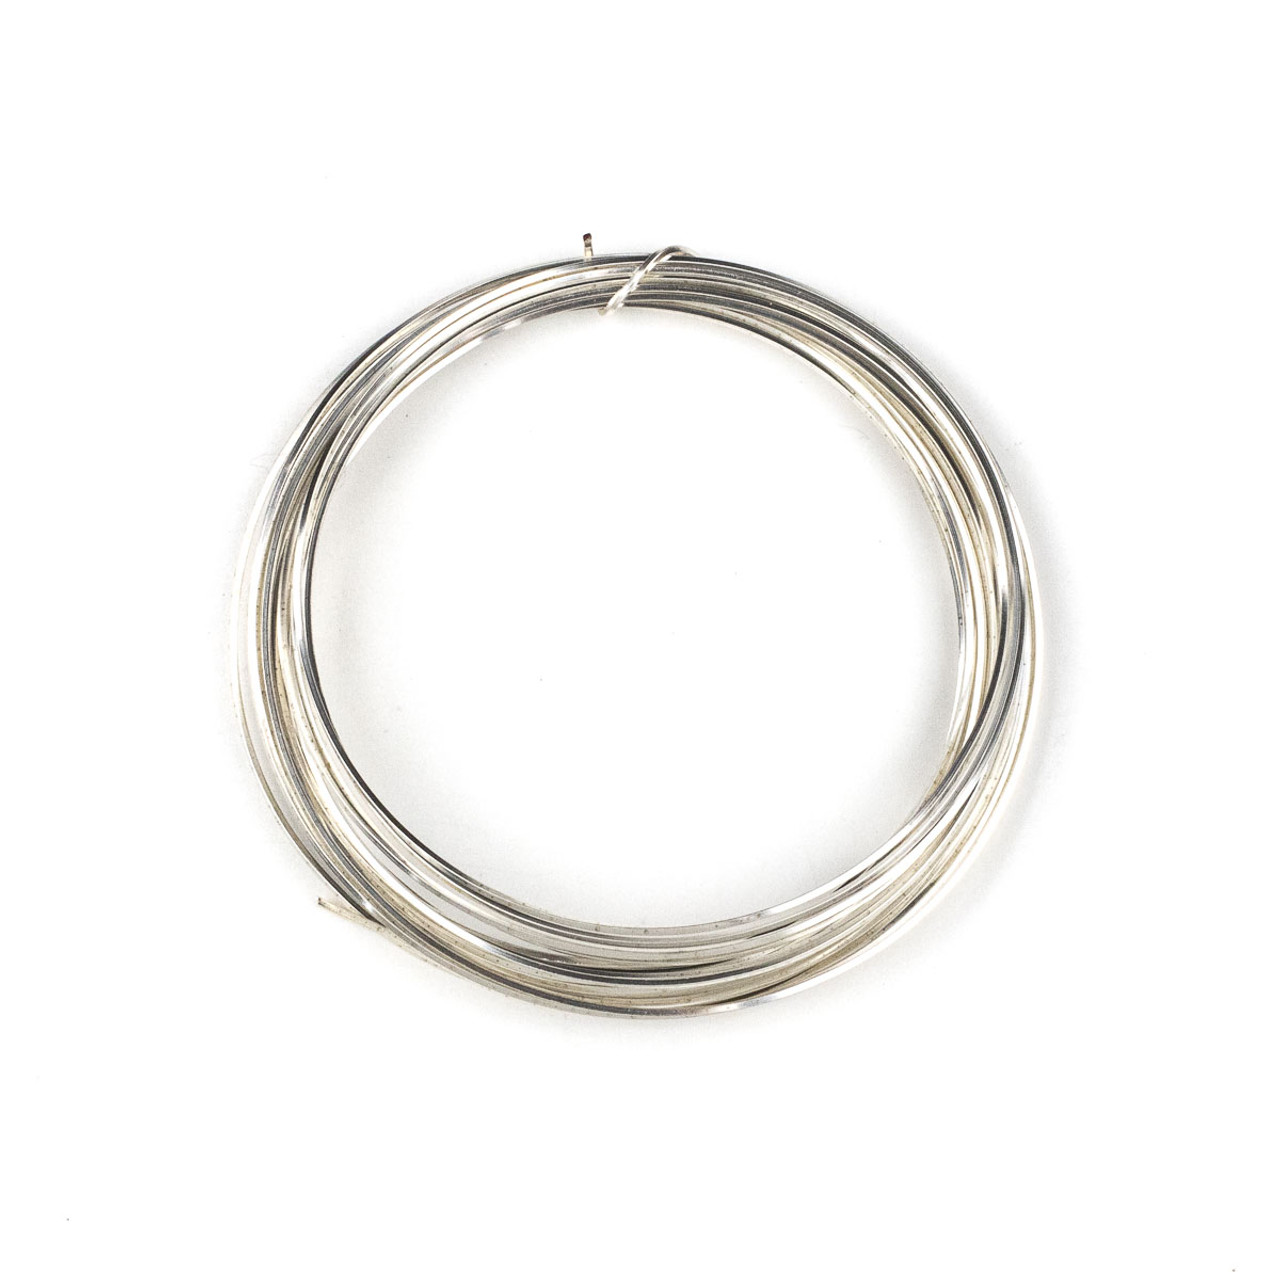 21 Gauge HALF ROUND SILVER Silver Plated Wire Tarnish Resistant